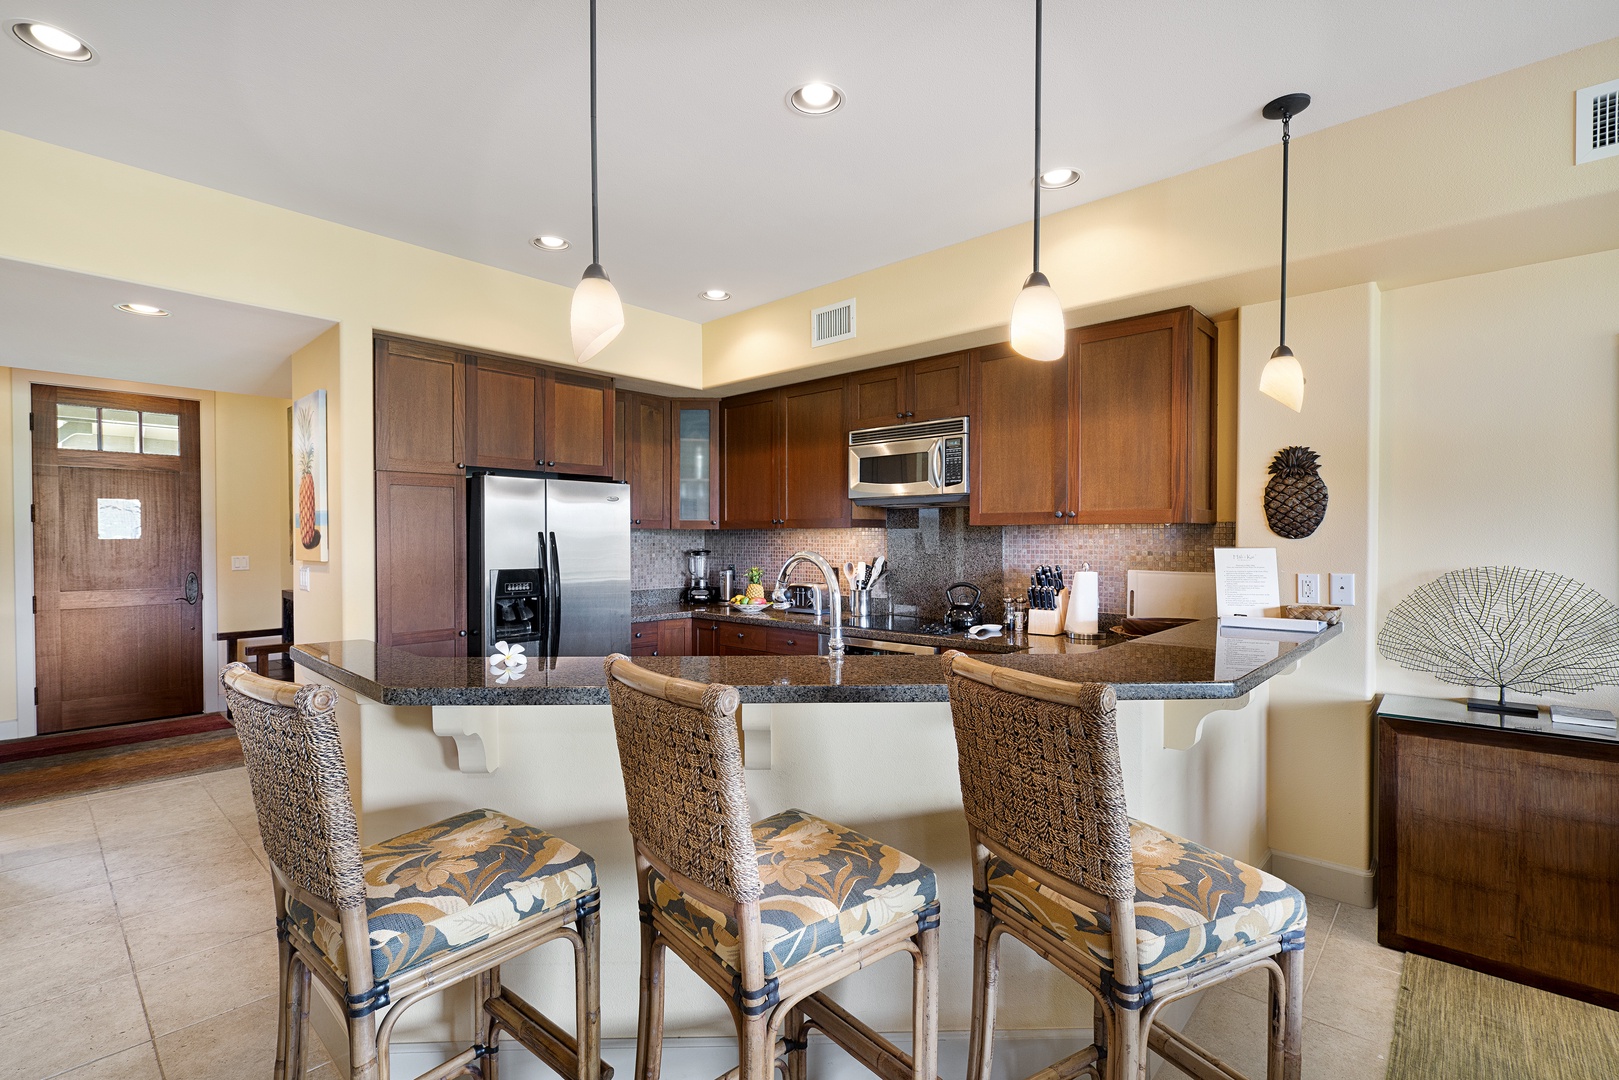 Waikoloa Vacation Rentals, Hali'i Kai at Waikoloa Beach Resort 9F - Kitchen and dining area will make hanging out with friends a pleasure